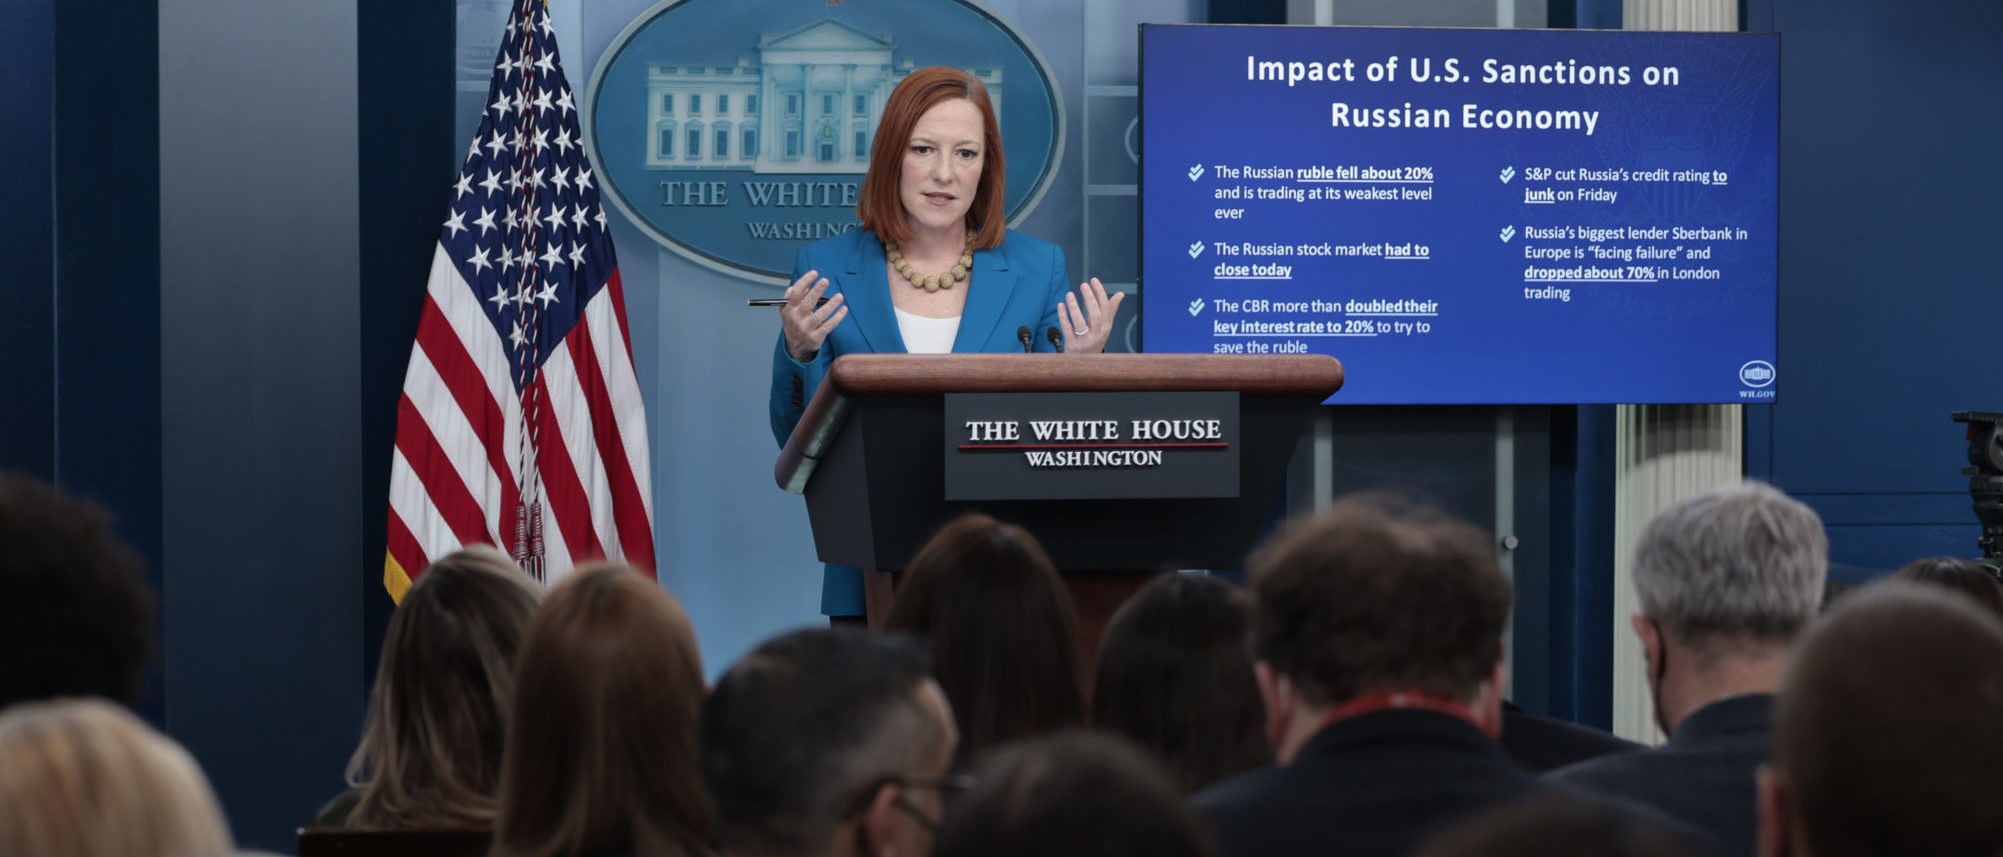 WASHINGTON, DC - FEBRUARY 28: White House press secretary Jen Psaki speaks during the daily press briefing on February 28, 2022 in Washington, DC. During the briefing Psaki previewed the remarks U.S. President Joe Biden will give during his first State of the Union address tomorrow. (Photo by Anna Moneymaker/Getty Images)